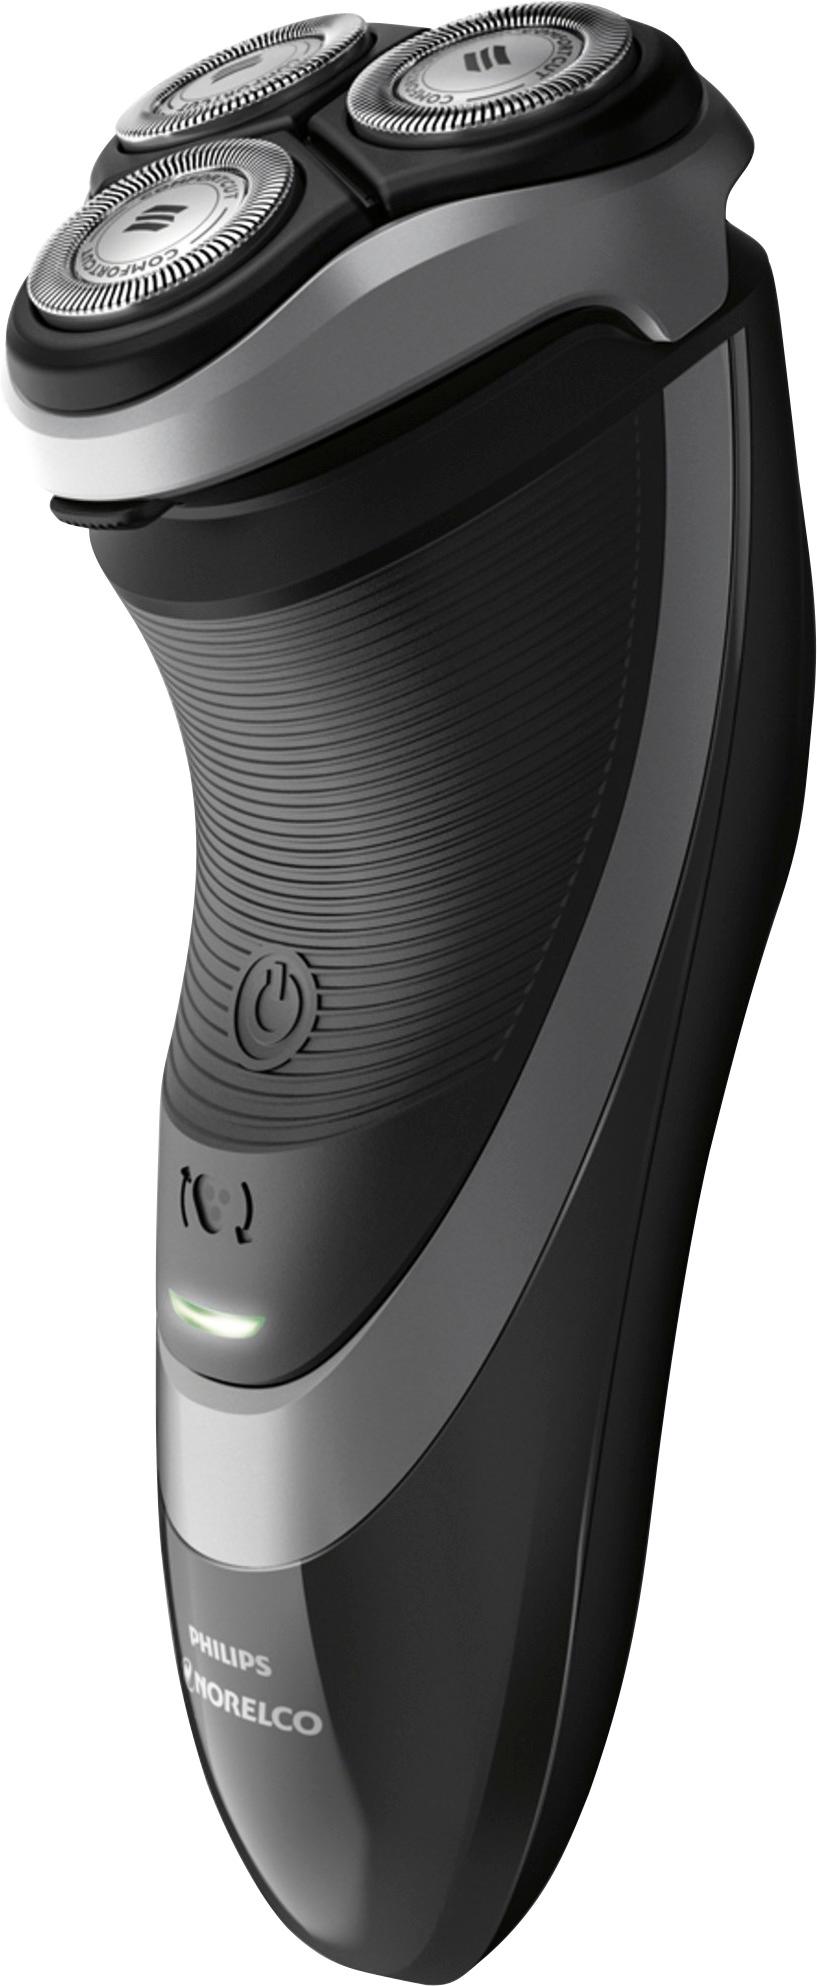 Shaver series 3000 wet & dry electric shaver with pop-up trimmer S3580/06